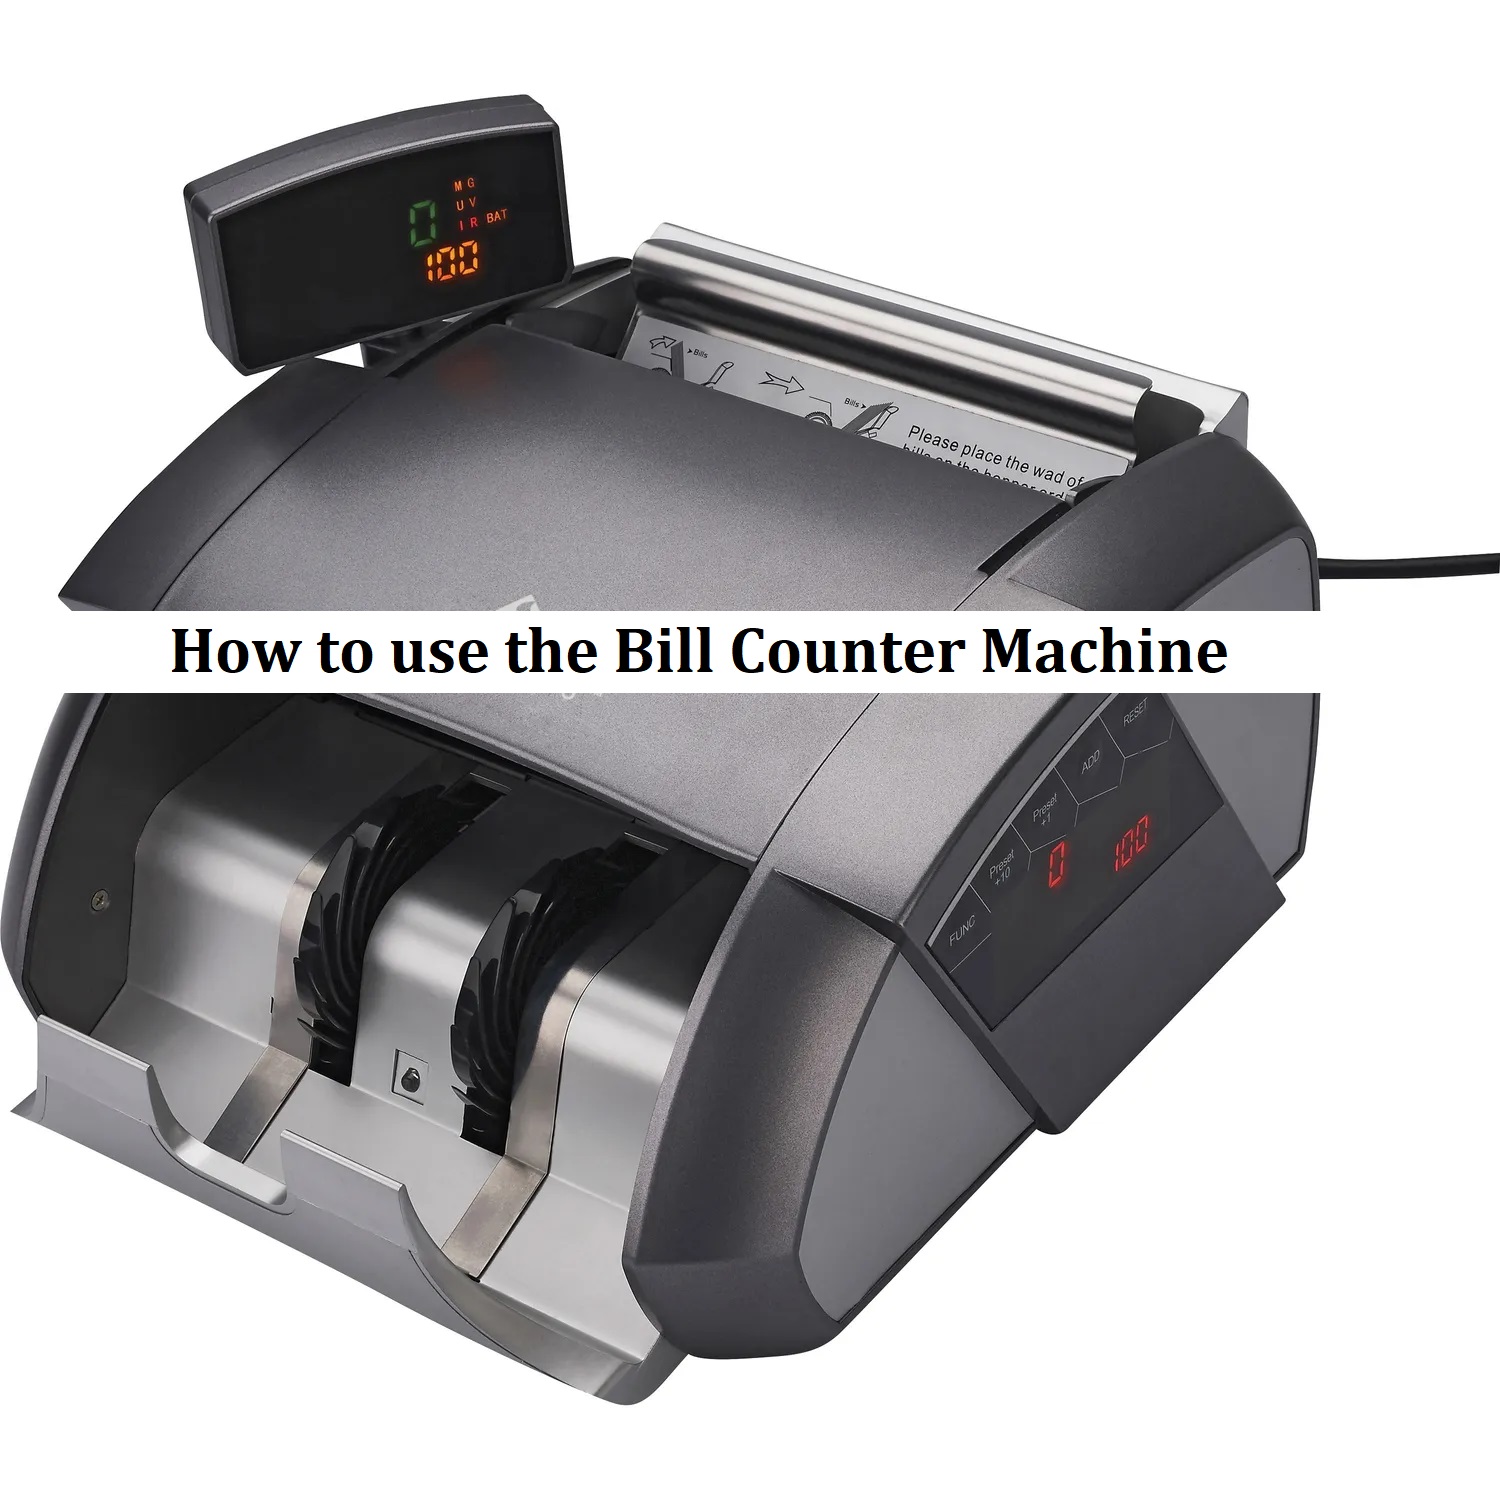 How to use the Bill Counter Machine